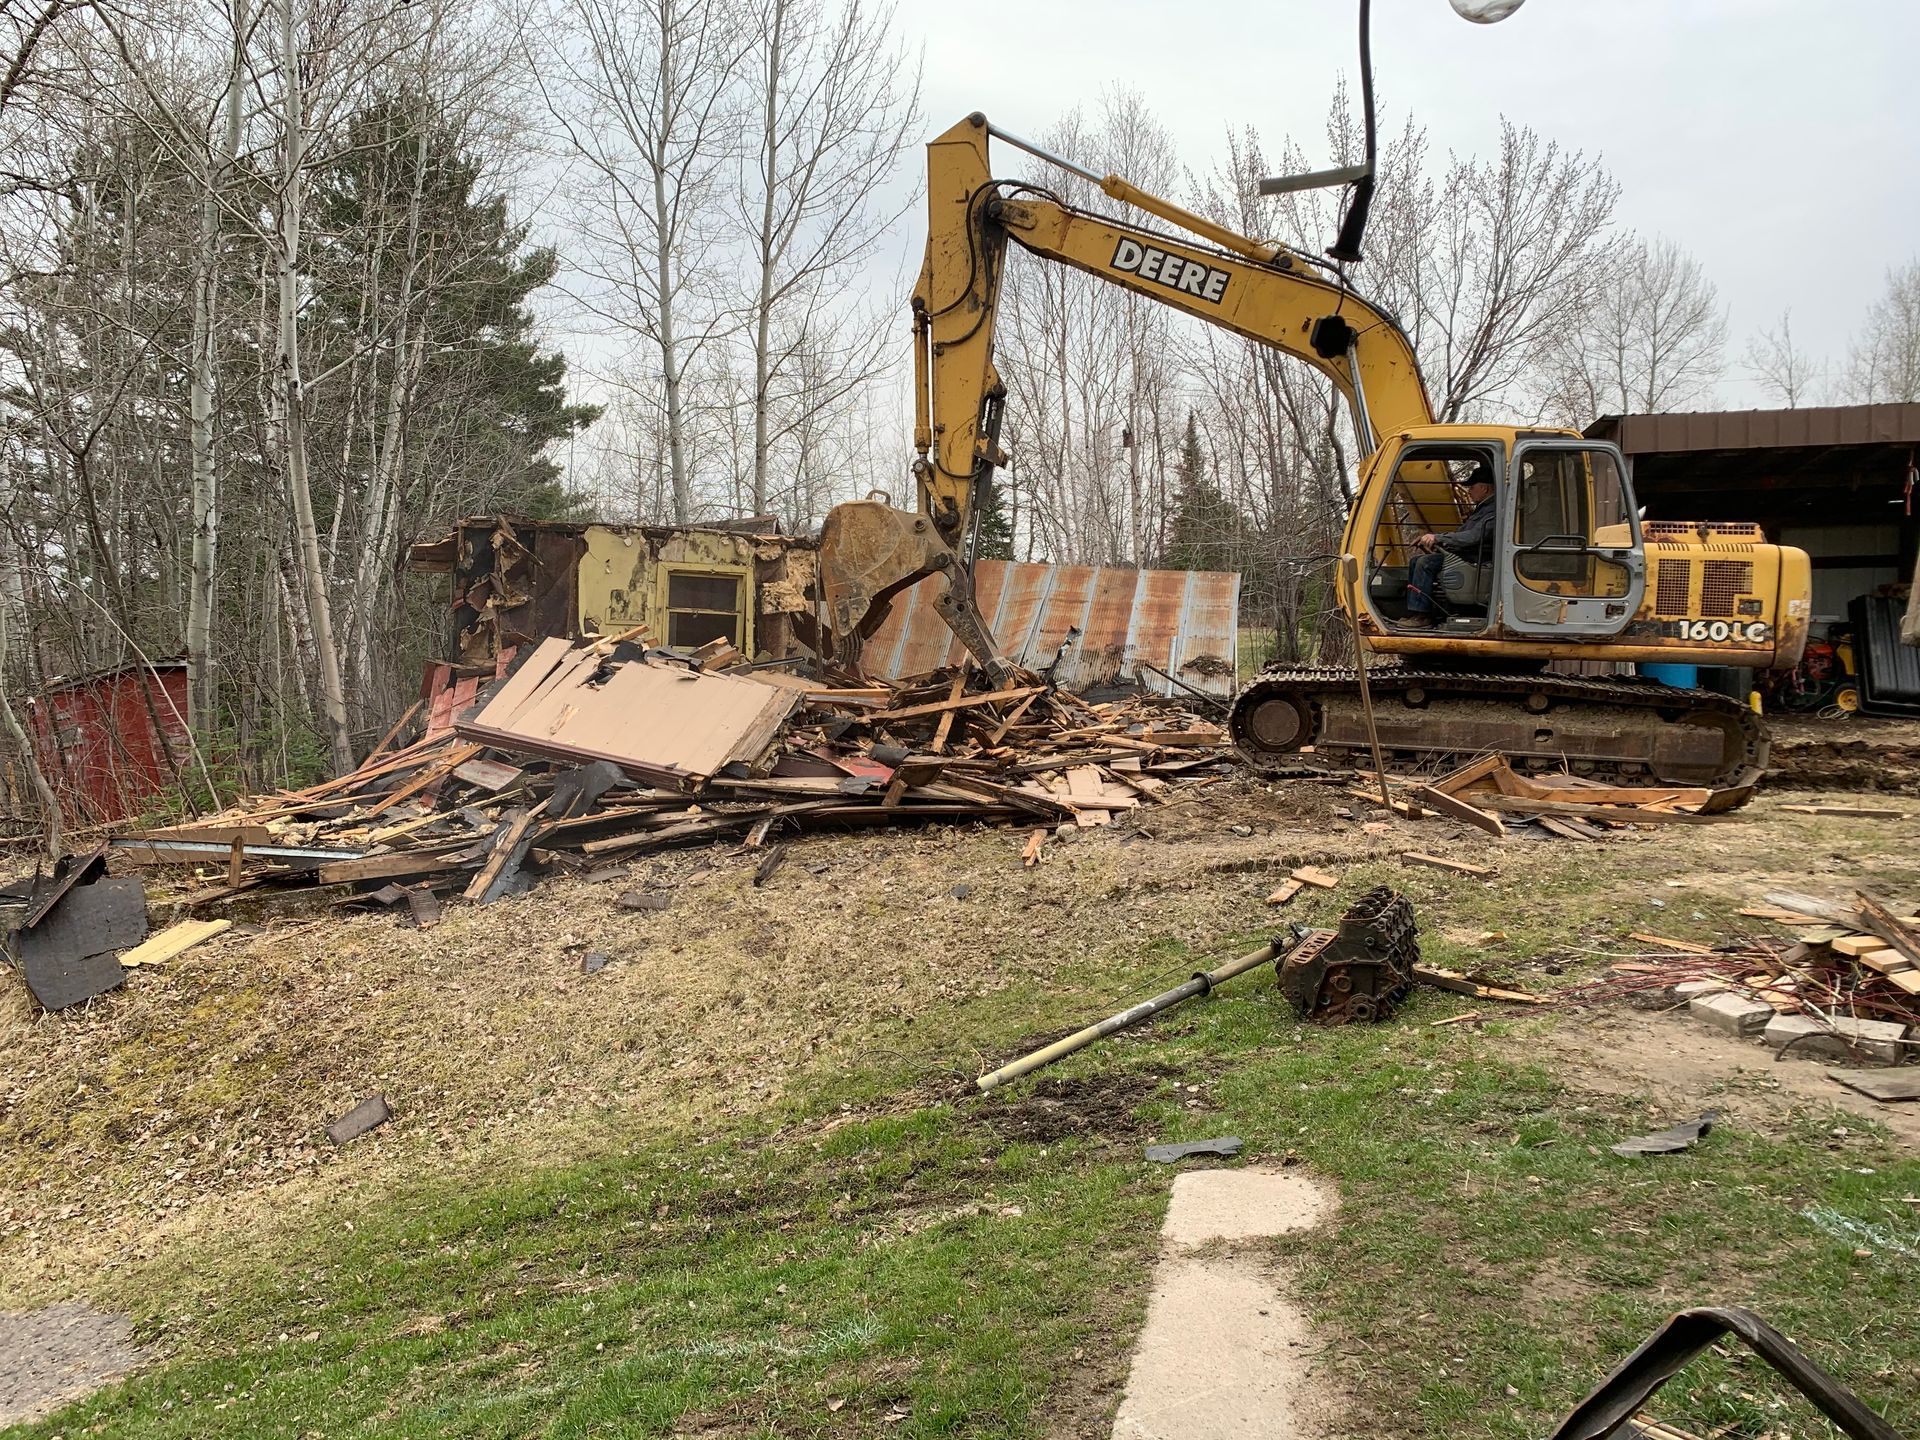 A large yellow excavator is demolishing a building in a yard.